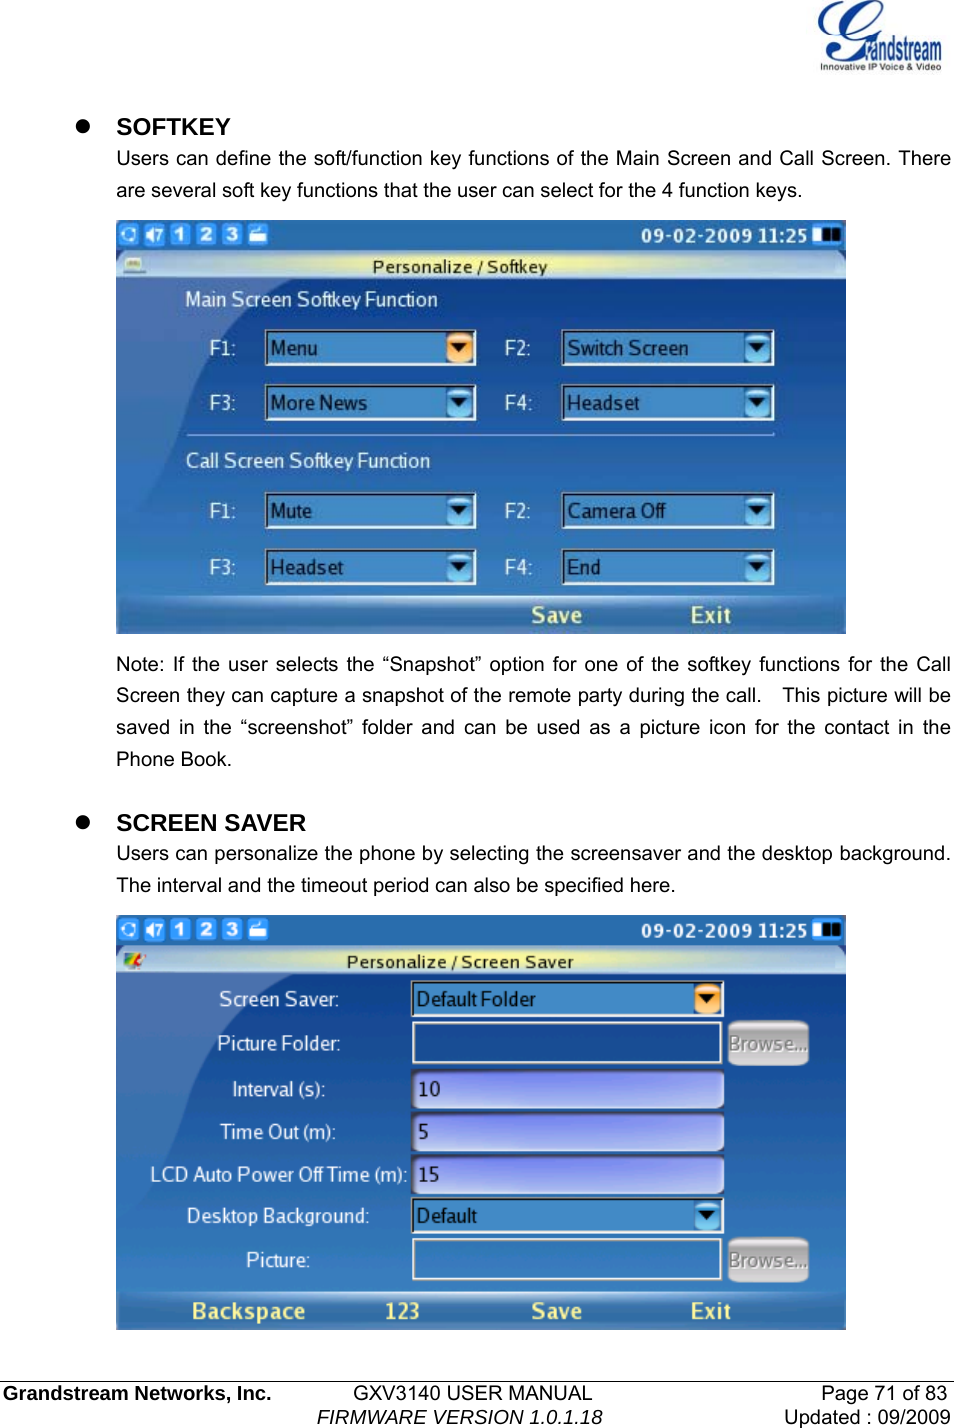   Grandstream Networks, Inc.        GXV3140 USER MANUAL                       Page 71 of 83                                FIRMWARE VERSION 1.0.1.18 Updated : 09/2009   z SOFTKEY Users can define the soft/function key functions of the Main Screen and Call Screen. There are several soft key functions that the user can select for the 4 function keys.  Note: If the user selects the “Snapshot” option for one of the softkey functions for the Call Screen they can capture a snapshot of the remote party during the call.    This picture will be saved in the “screenshot” folder and can be used as a picture icon for the contact in the Phone Book.    z SCREEN SAVER Users can personalize the phone by selecting the screensaver and the desktop background. The interval and the timeout period can also be specified here.  